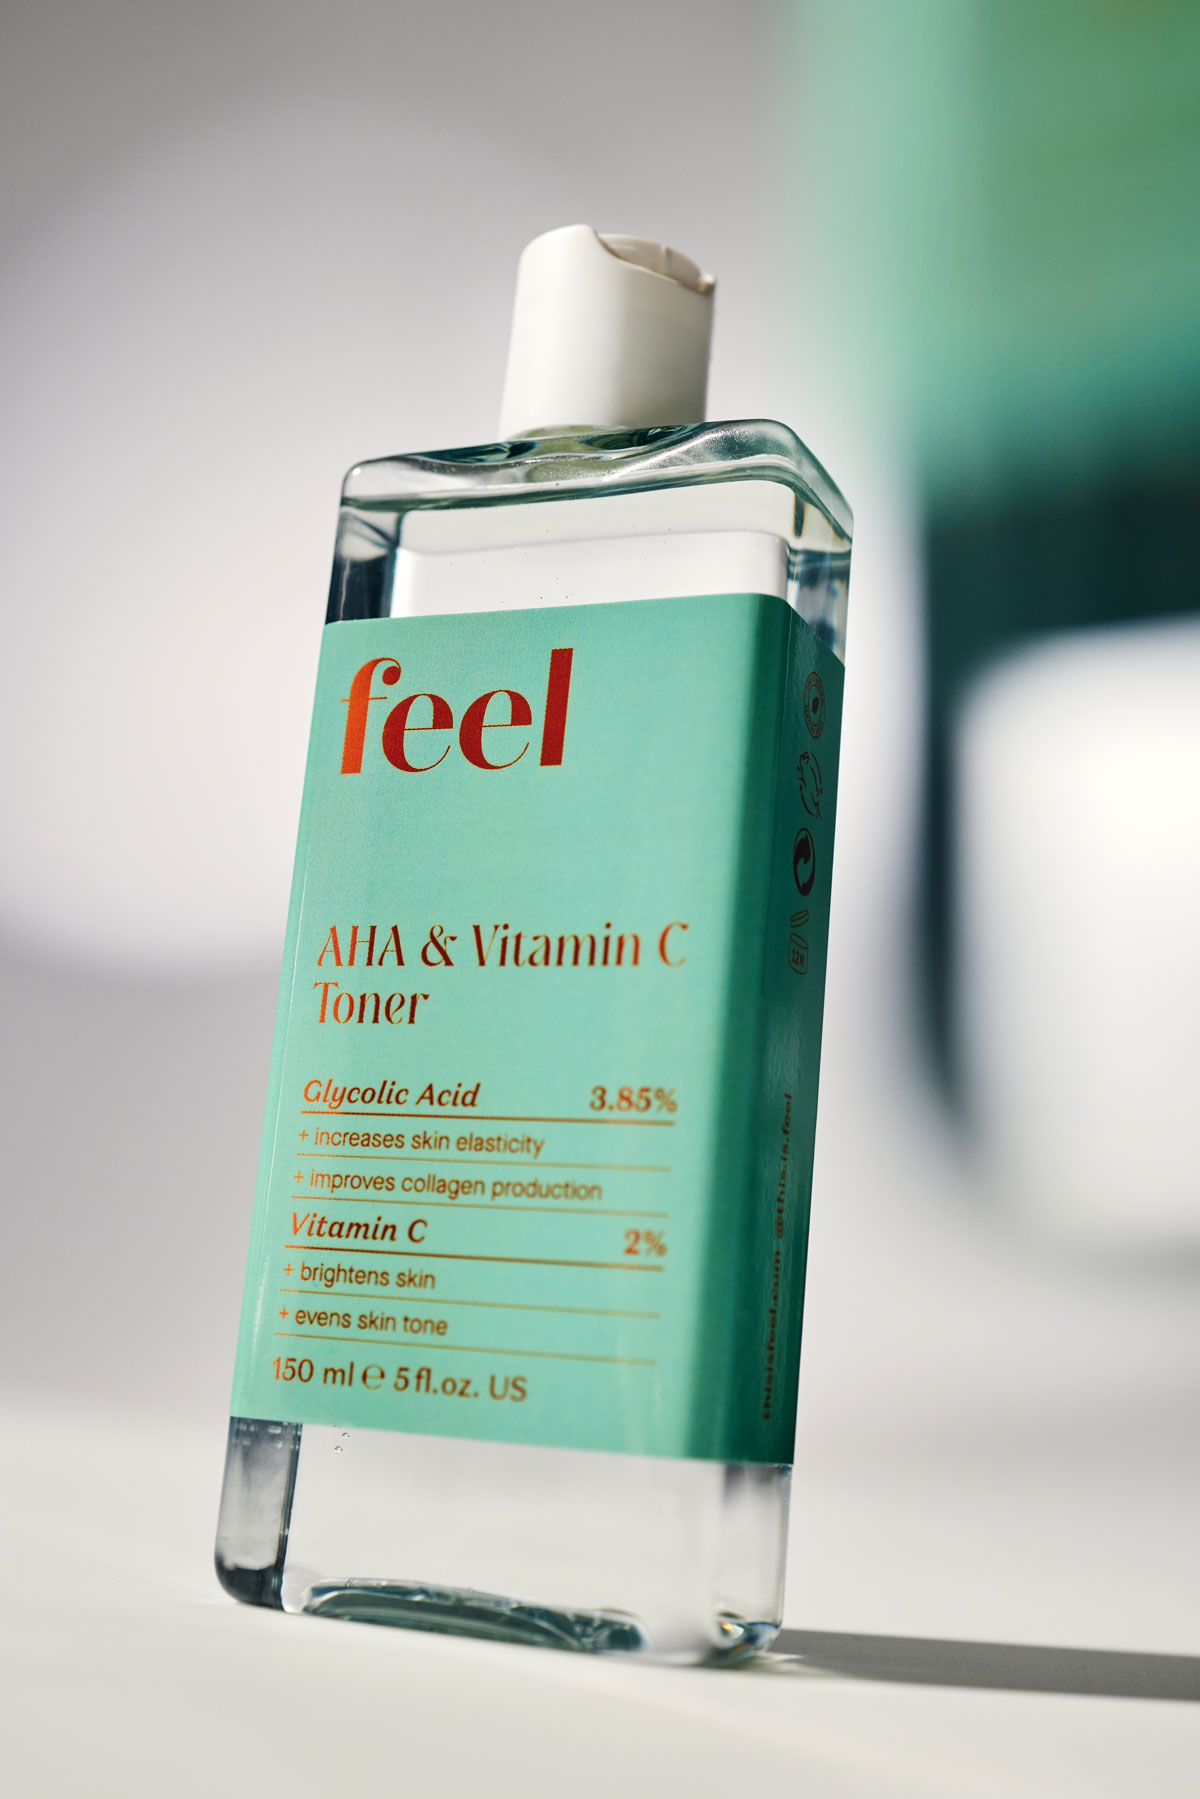 A clean rectangular bottle with a teal label that says "AHA & Vitamin C Toner" stands in the centre of a grey background. The image is taken at an angle.